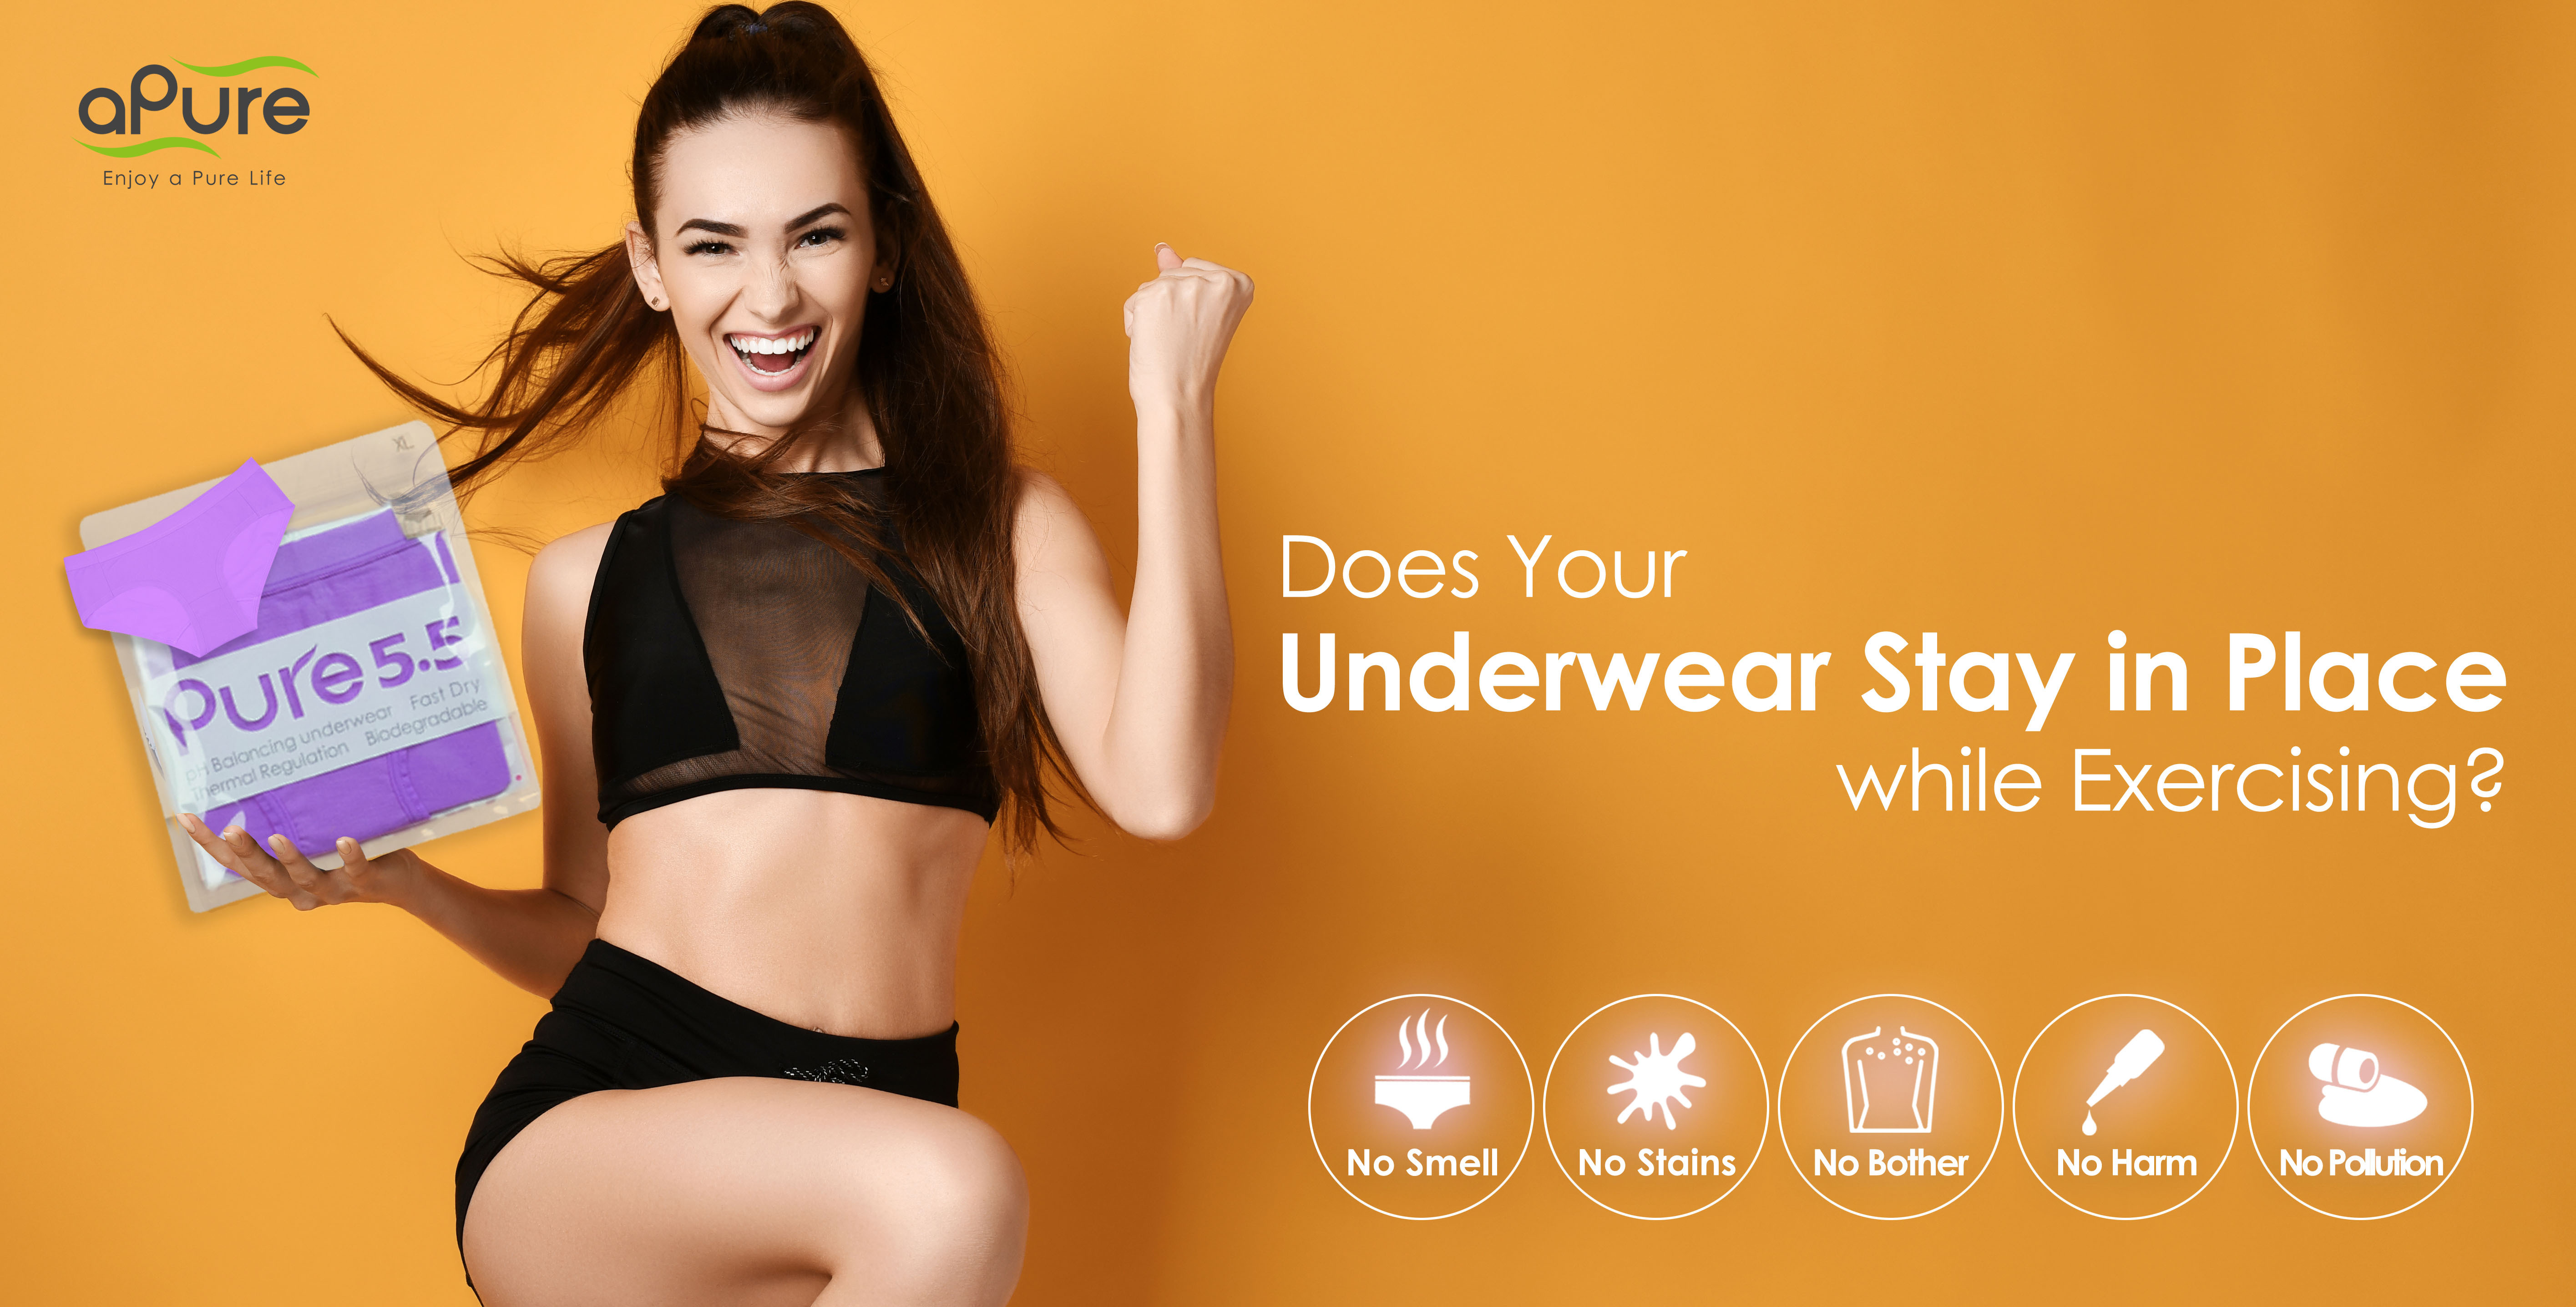 https://mms.businesswire.com/media/20190917005667/en/744164/5/0917-Does_Your_Underwear_Stay_in_Place_and_Keep_You_Cool_and_Dry_while_Exercising.jpg